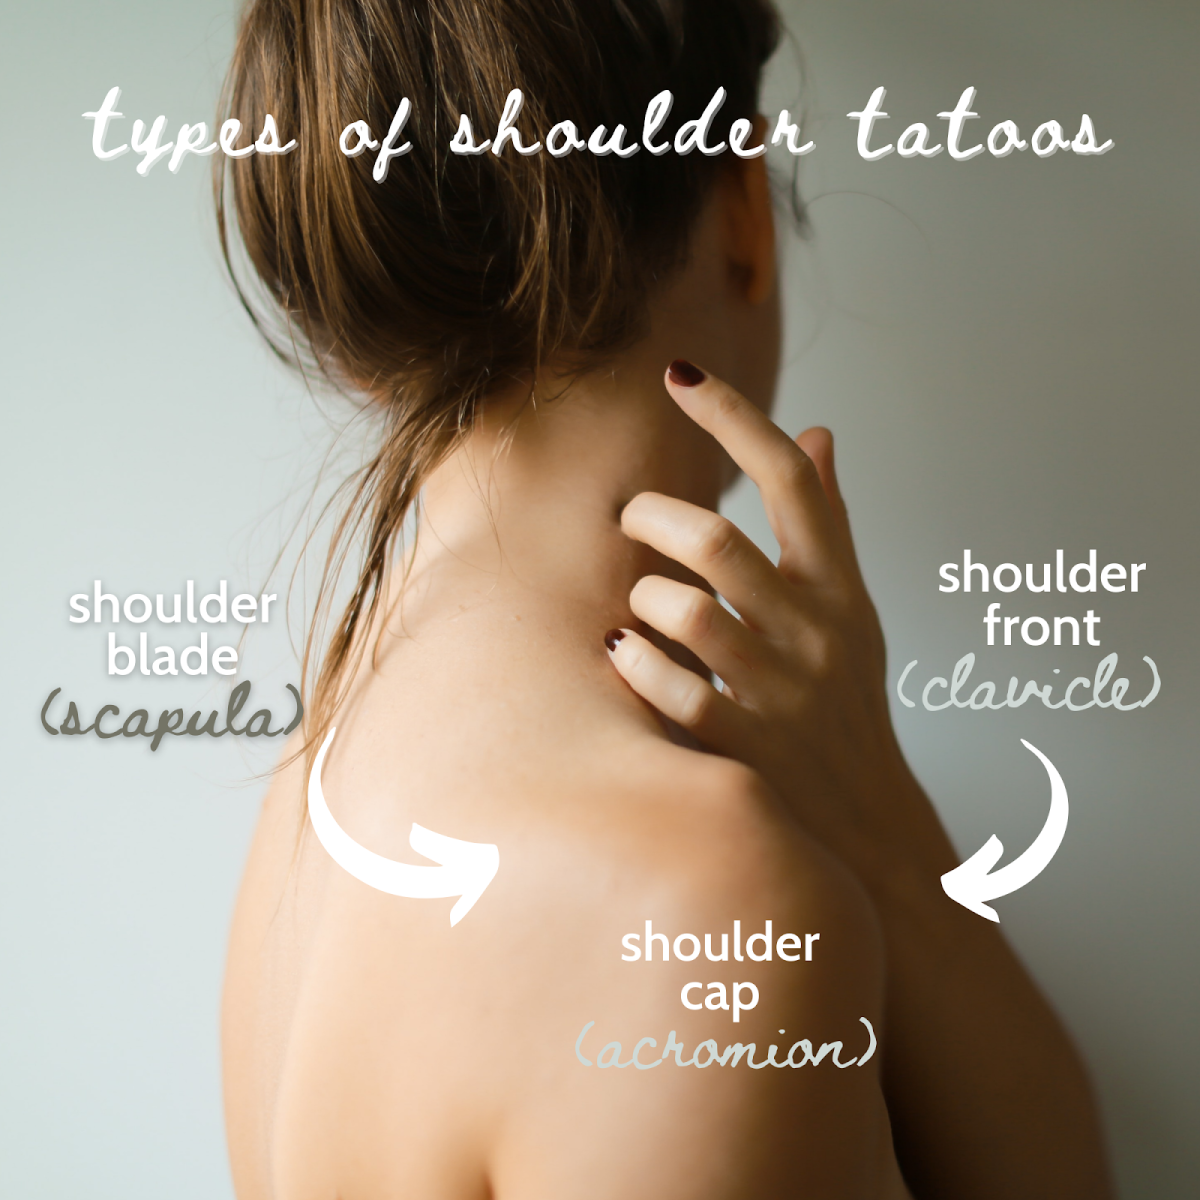 Different places you can get a shoulder tattoo: scapula, acromion, or clavicle. 